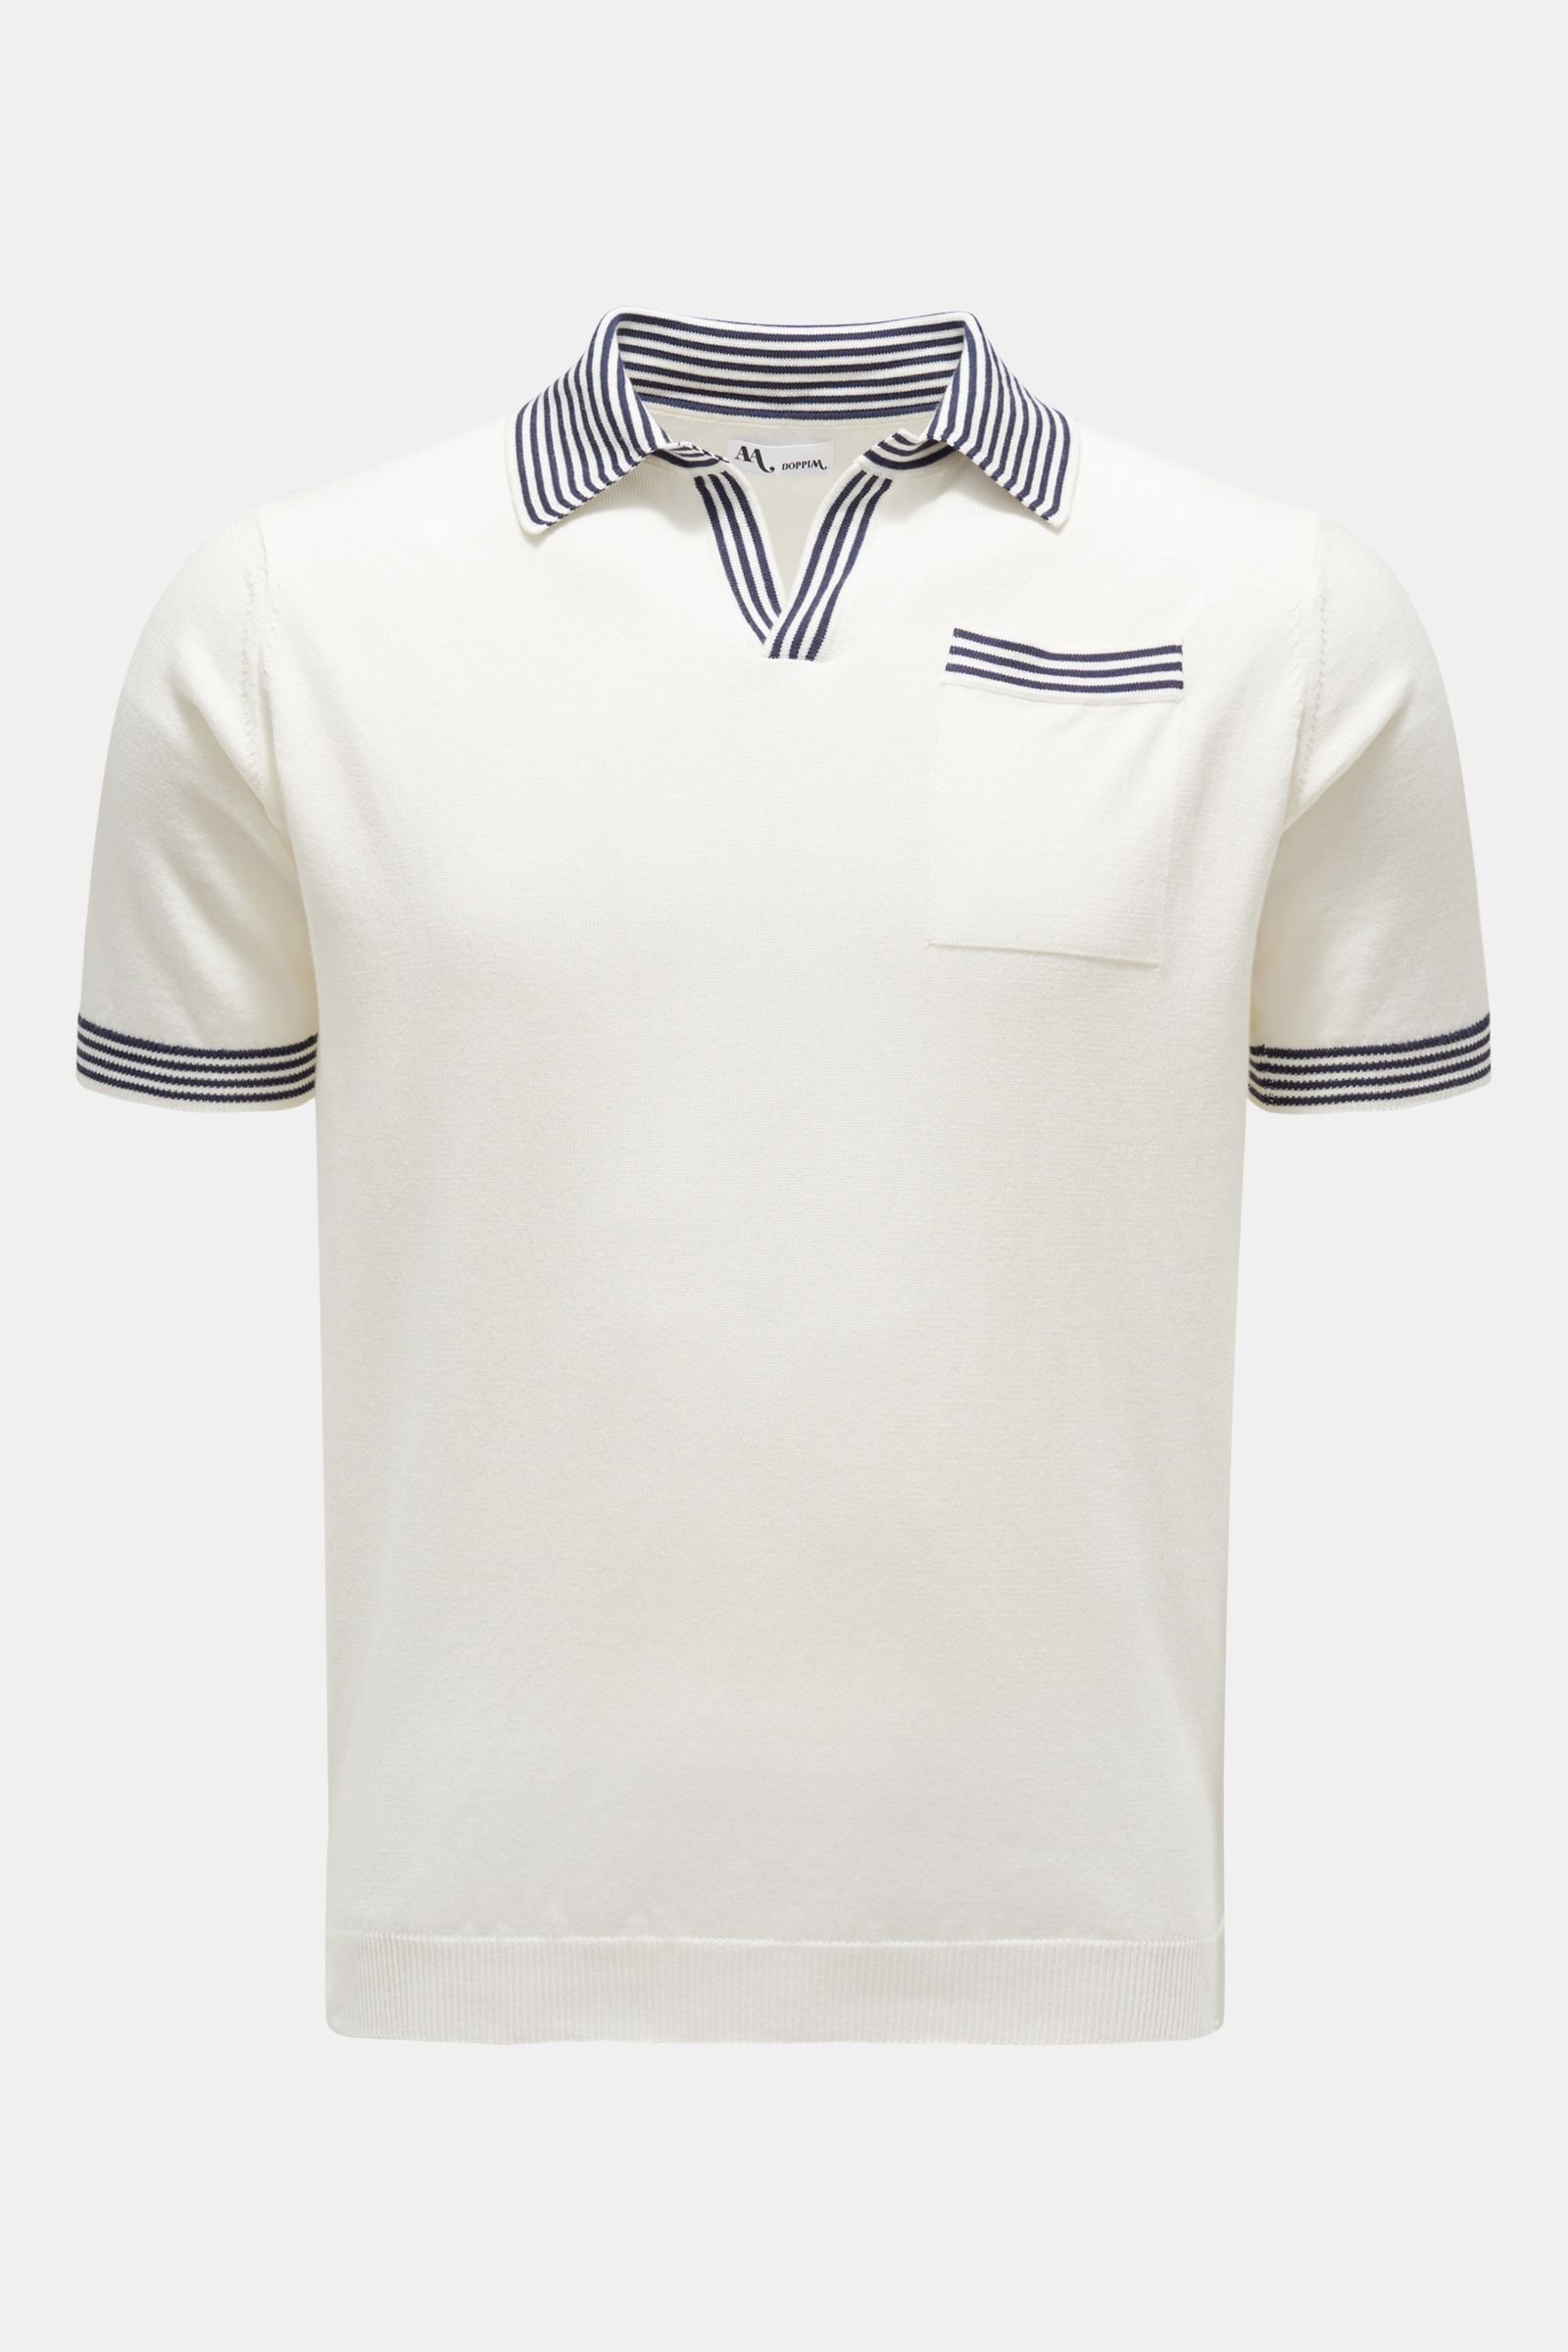 Short sleeve knit polo 'Aavio' off-white/navy